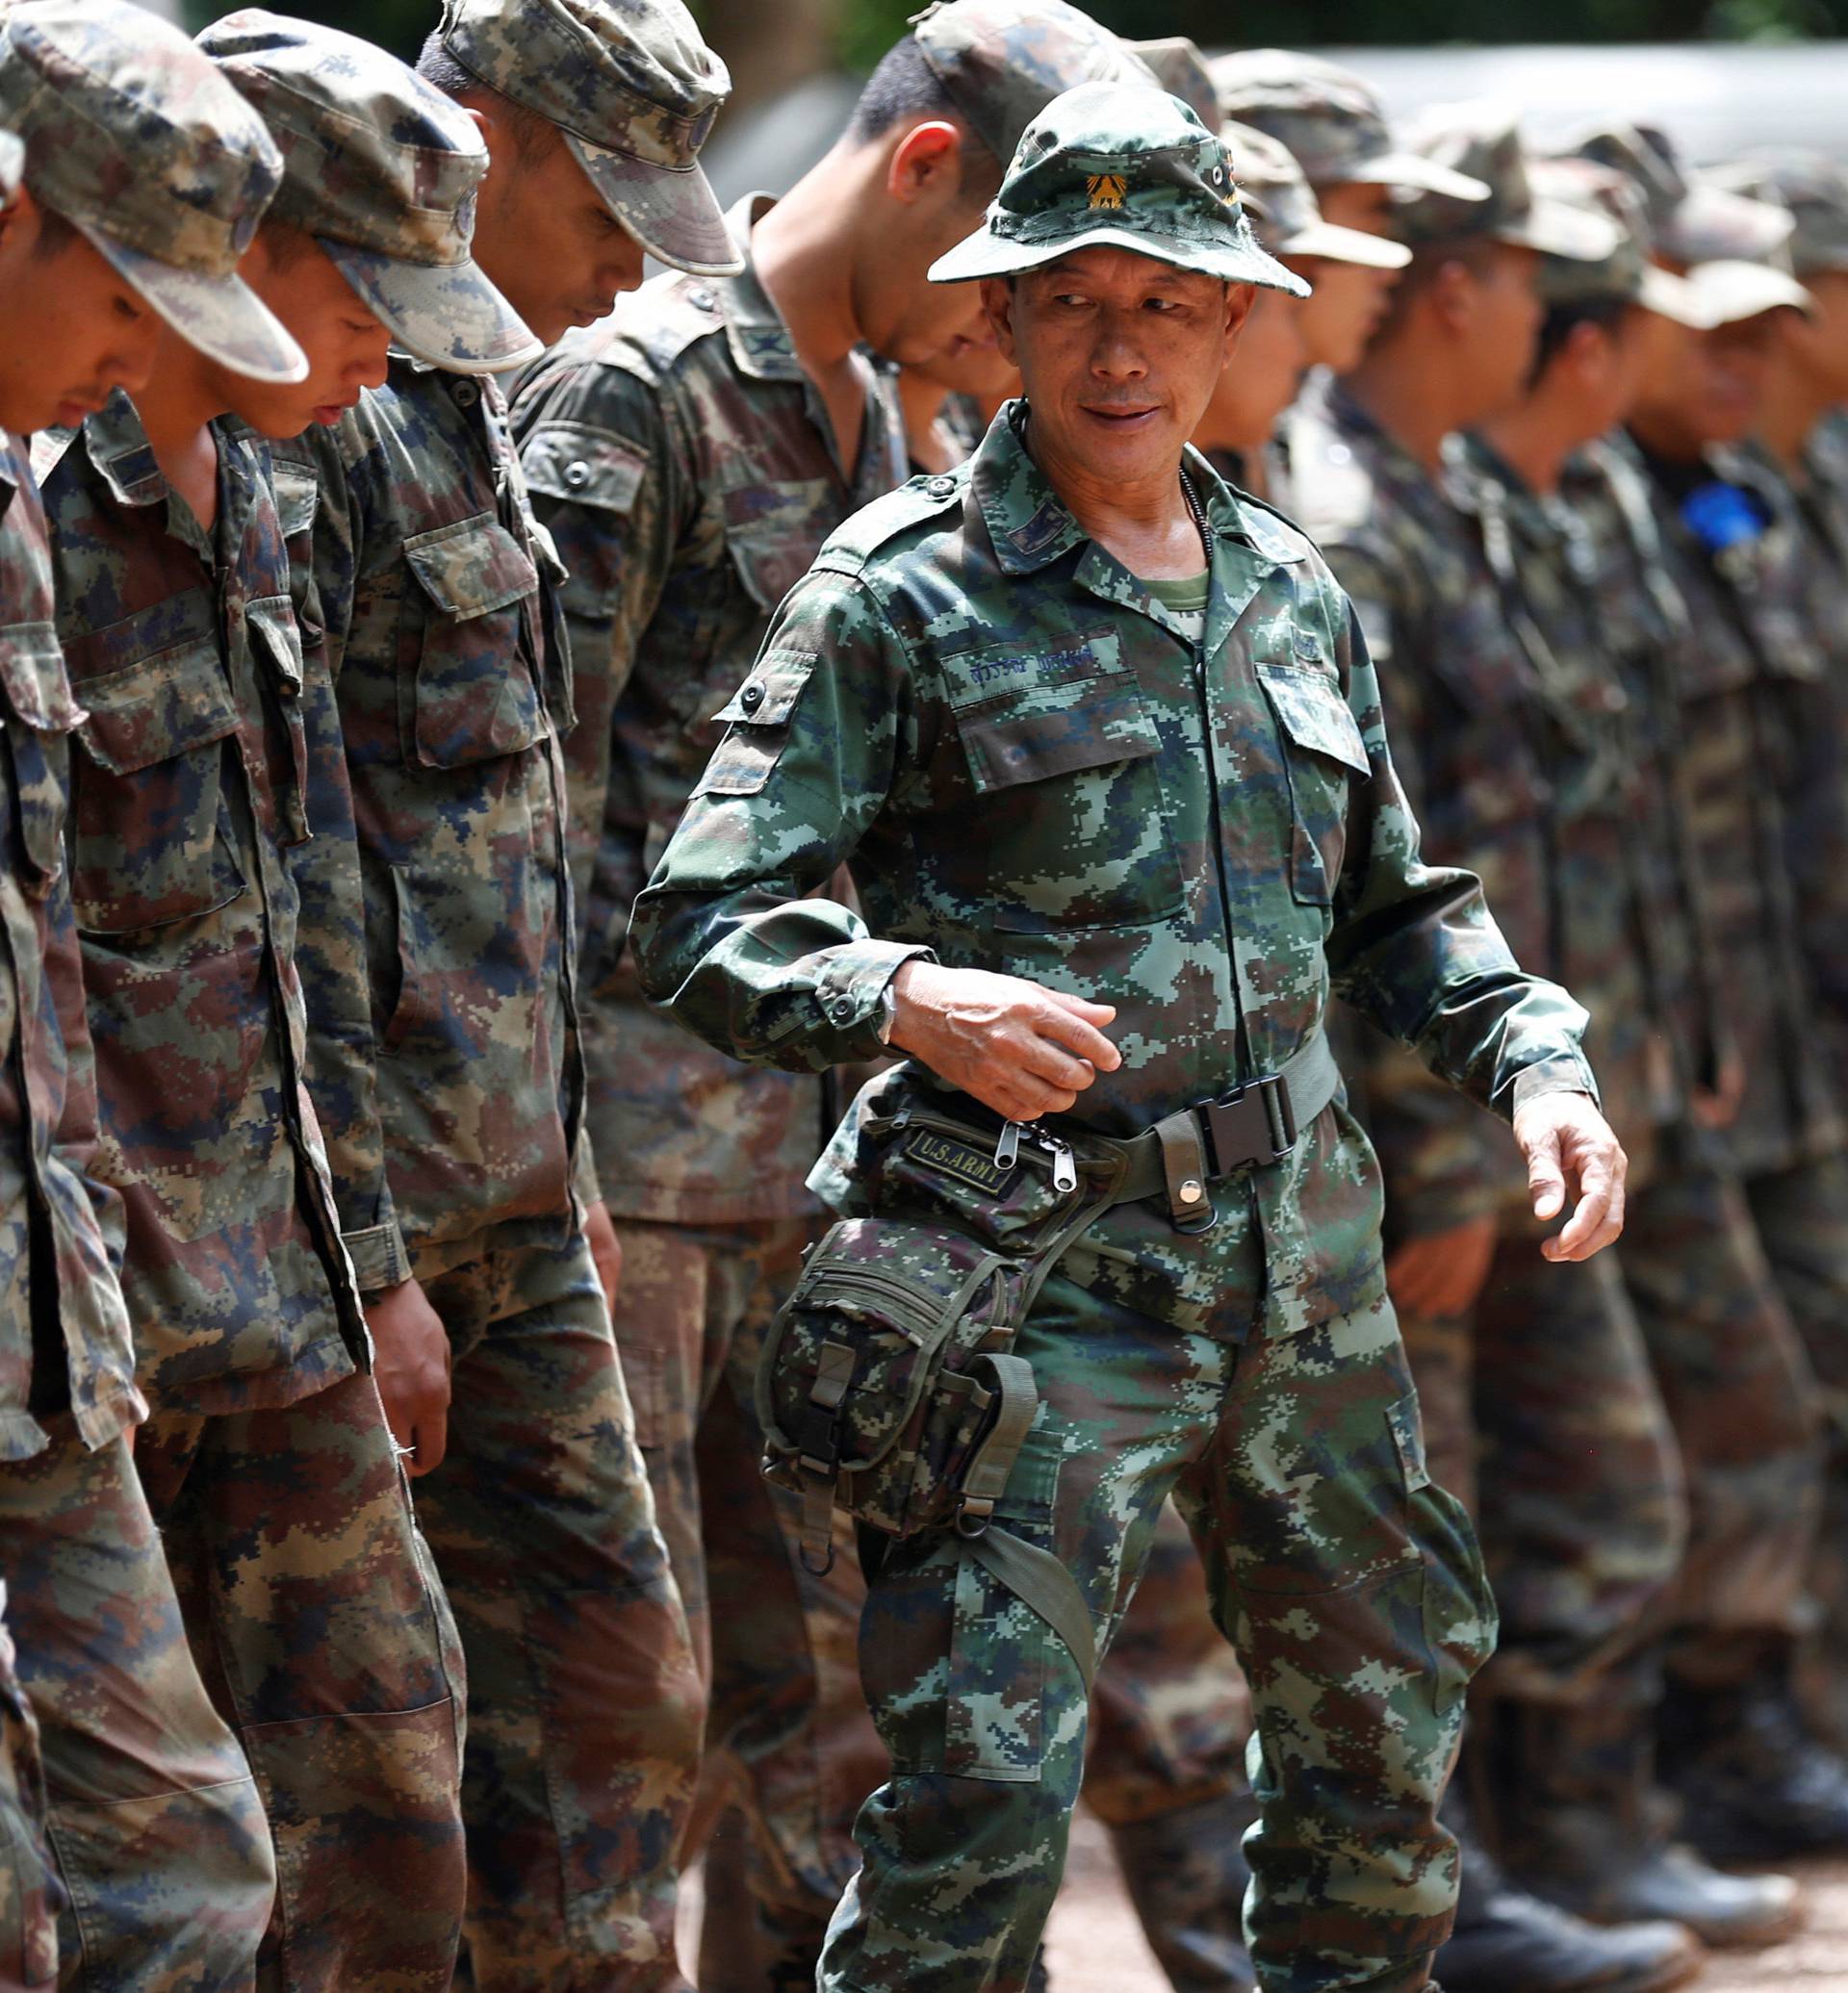 Soldiers stand during a drill near the Tham Luang cave complex, as members of an under-16 soccer team and their coach have been reported by local media to be found alive, in the northern province of Chiang Rai